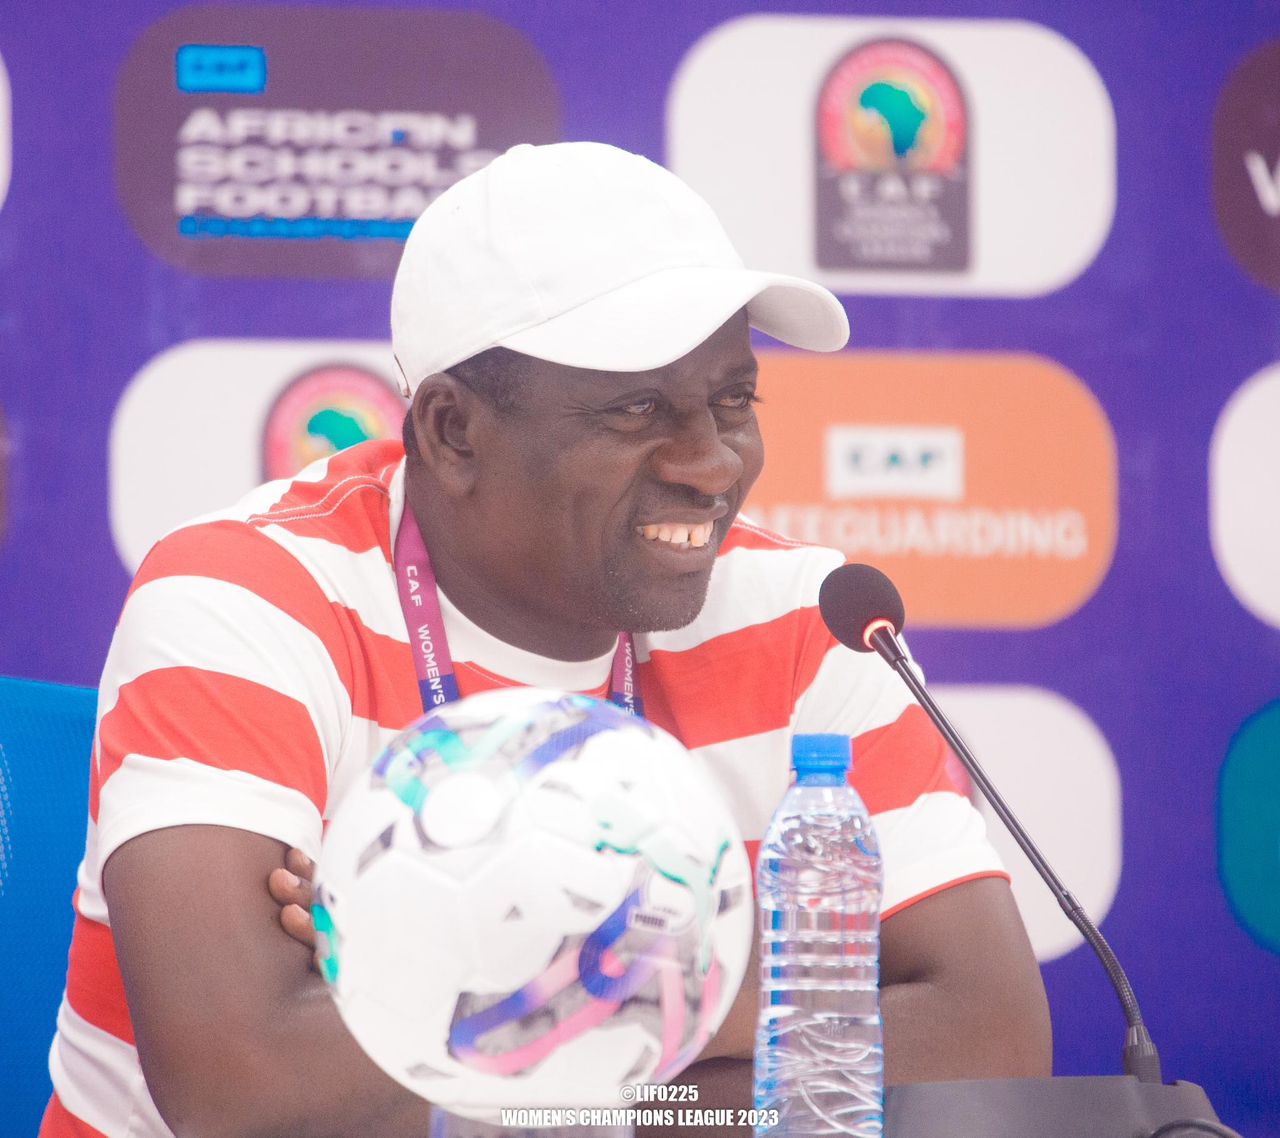 Nana Adarkwa nominated for CAF coach of the year award - Women category